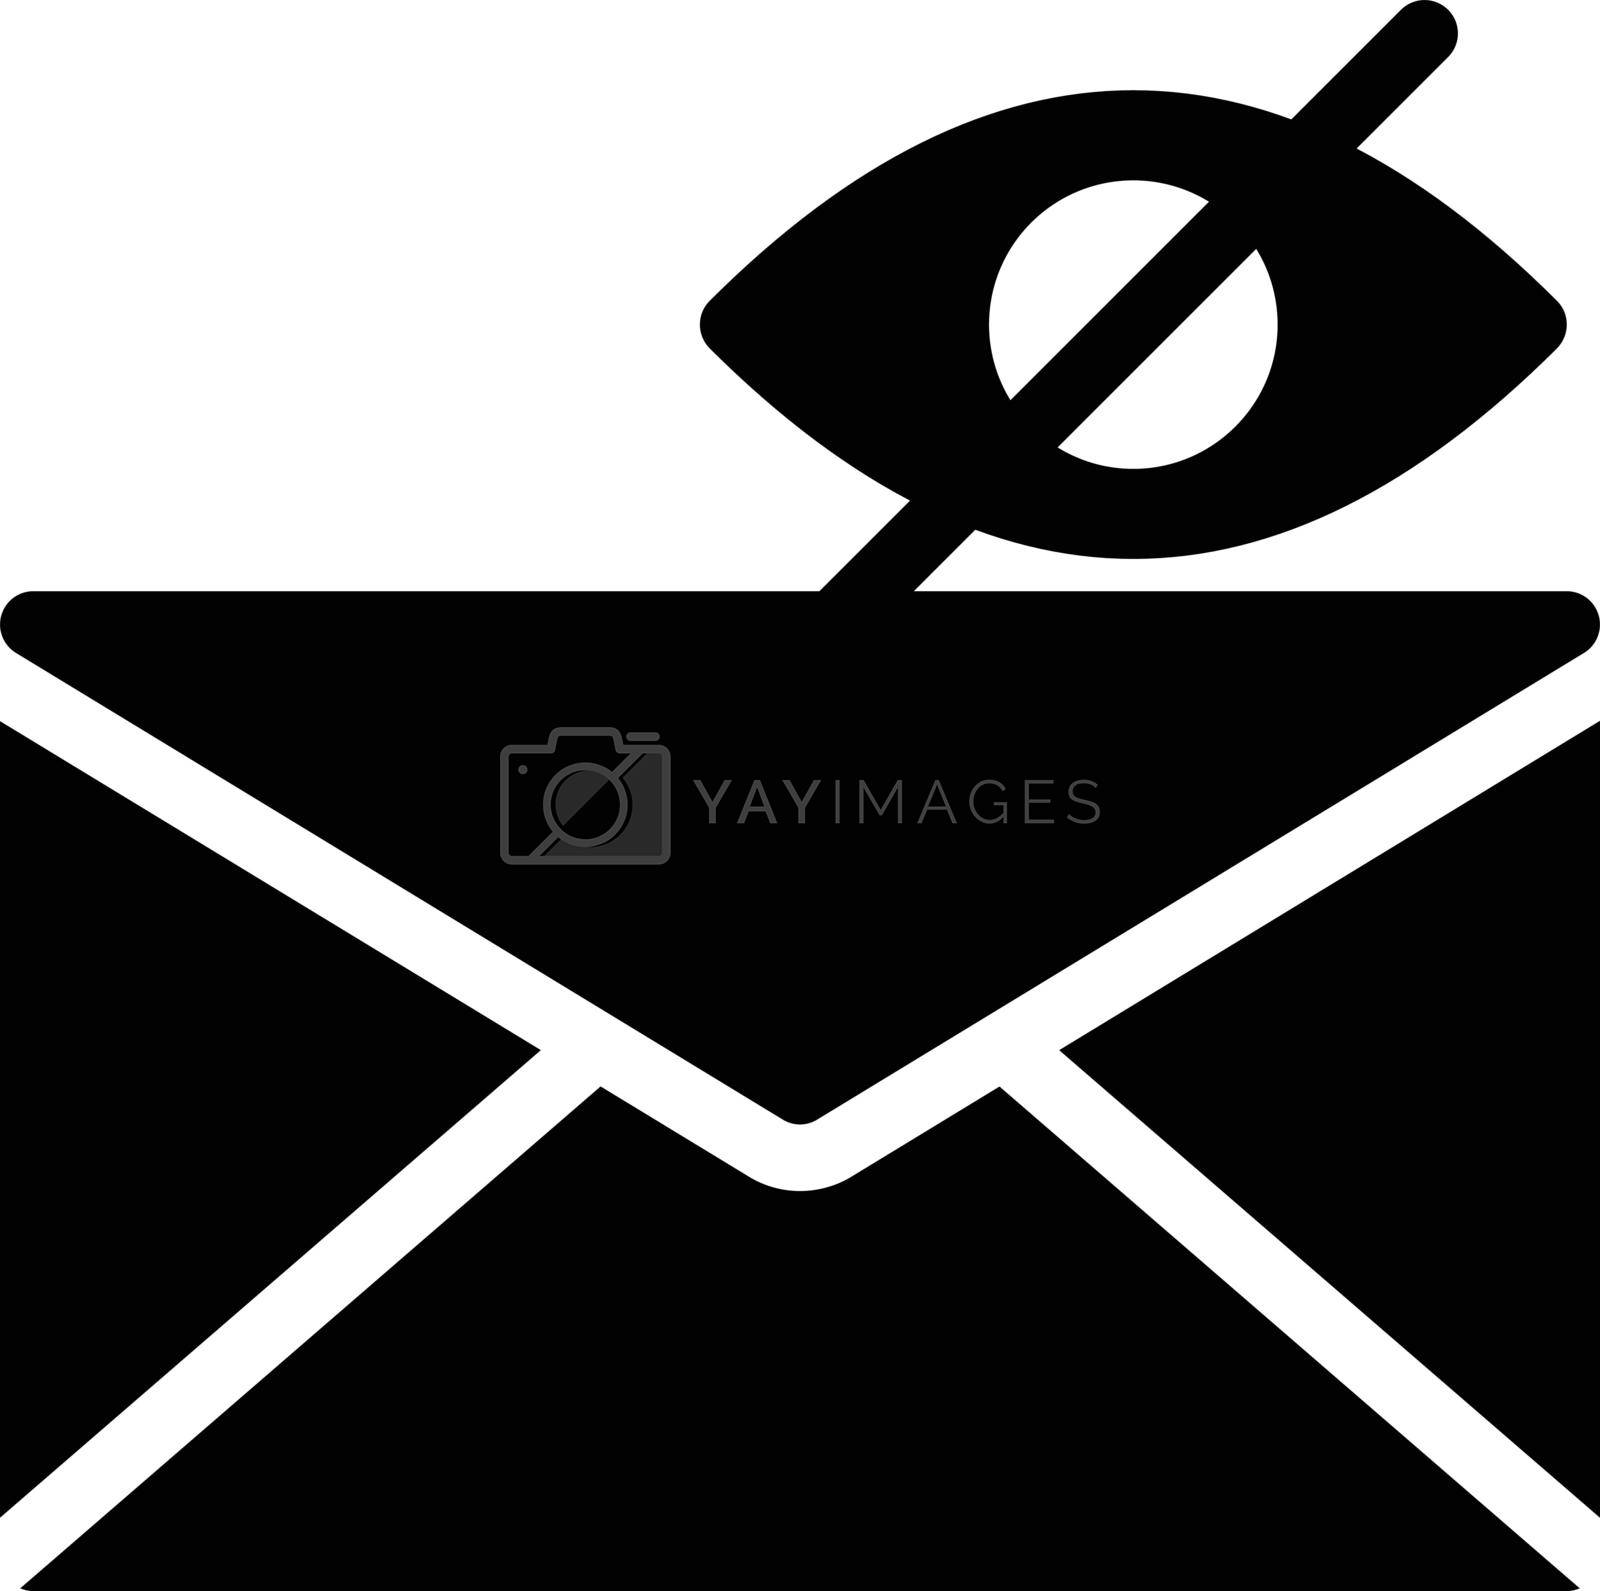 Royalty free image of mail by FlaticonsDesign